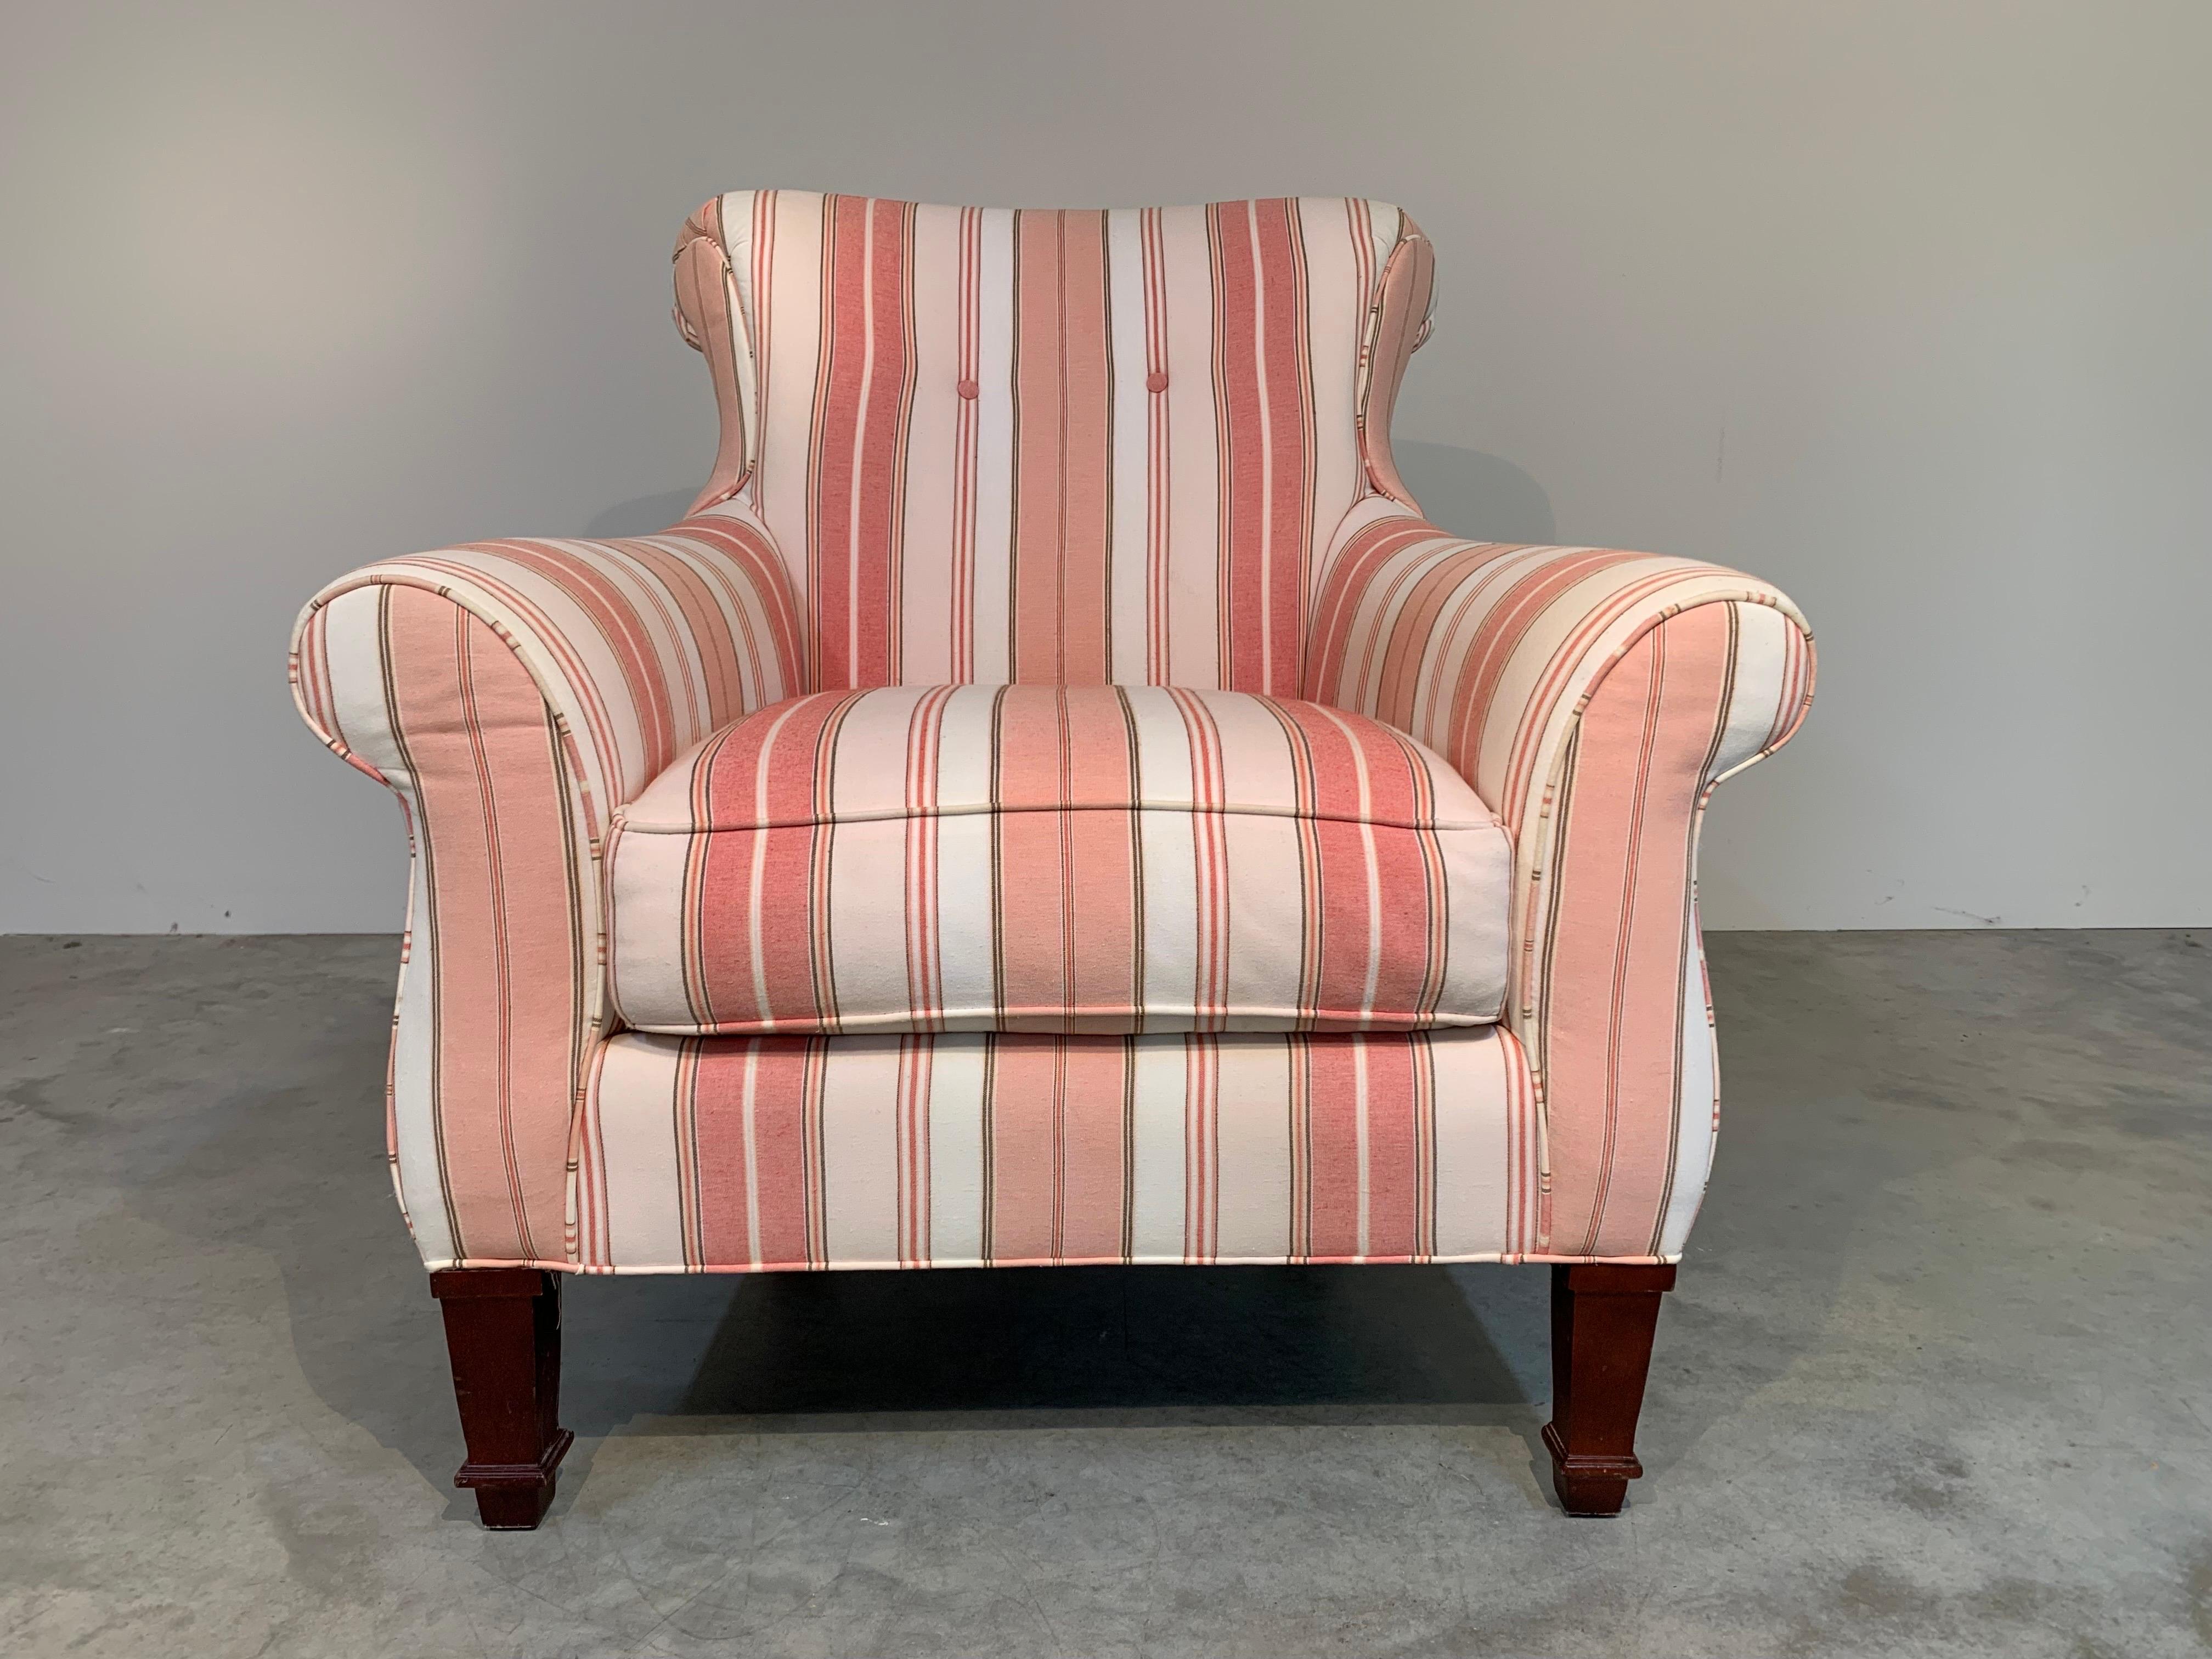 Modern regency style scroll arm & back lounge or club chair in salmon & white stripe cotton linen upholstery over Directoire style walnut legs by CR Laine in the manner of Henredon or Baker. 
 Wonderfully comfortable lounge chair having buoyant